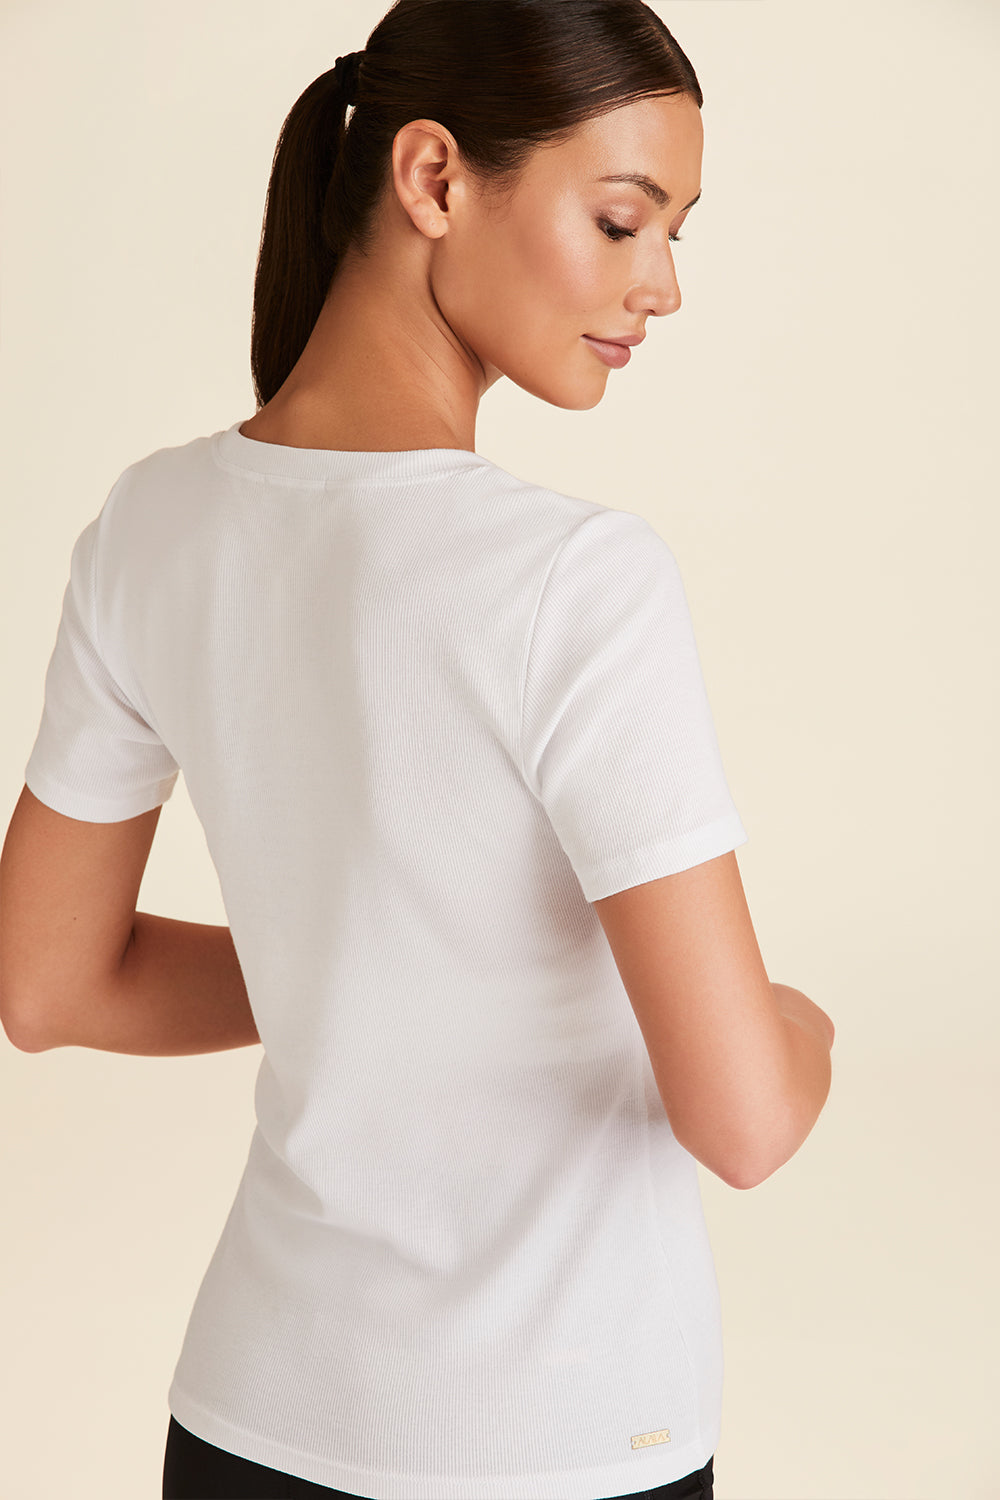 White slim tee for women from Alala activewear